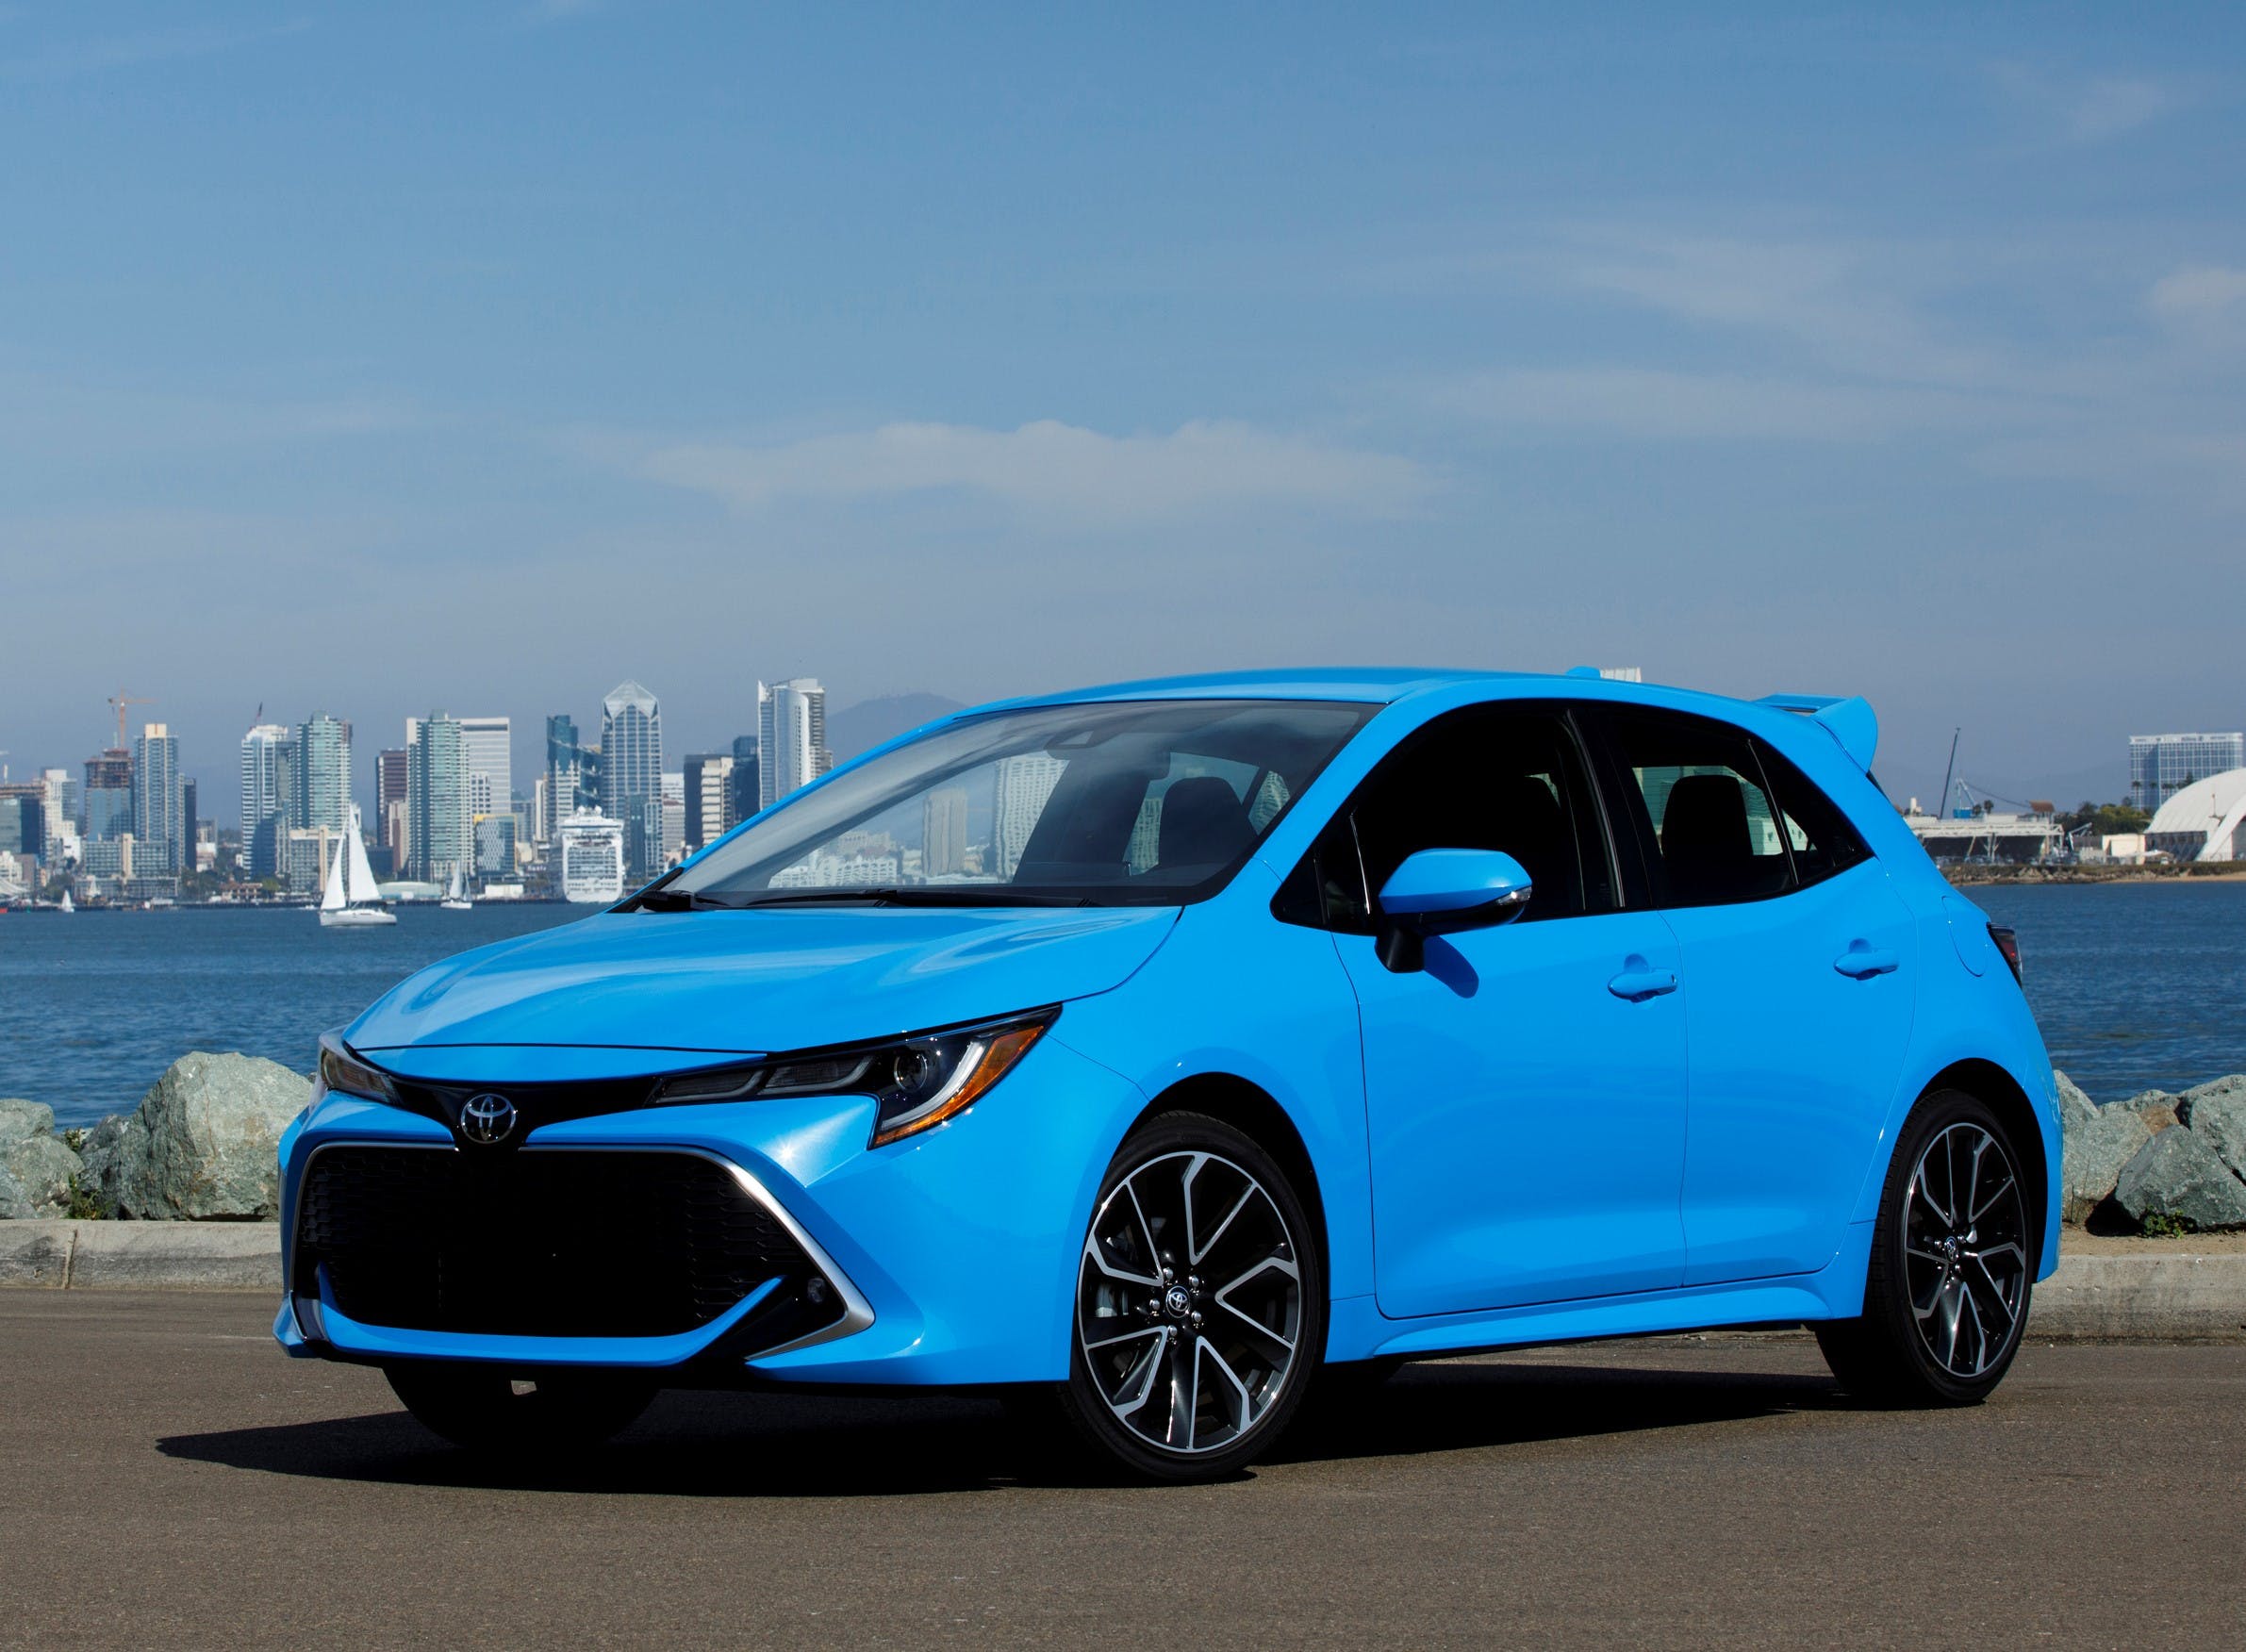 Test Drive: 2021 Corolla Hatchback Review - CARFAX